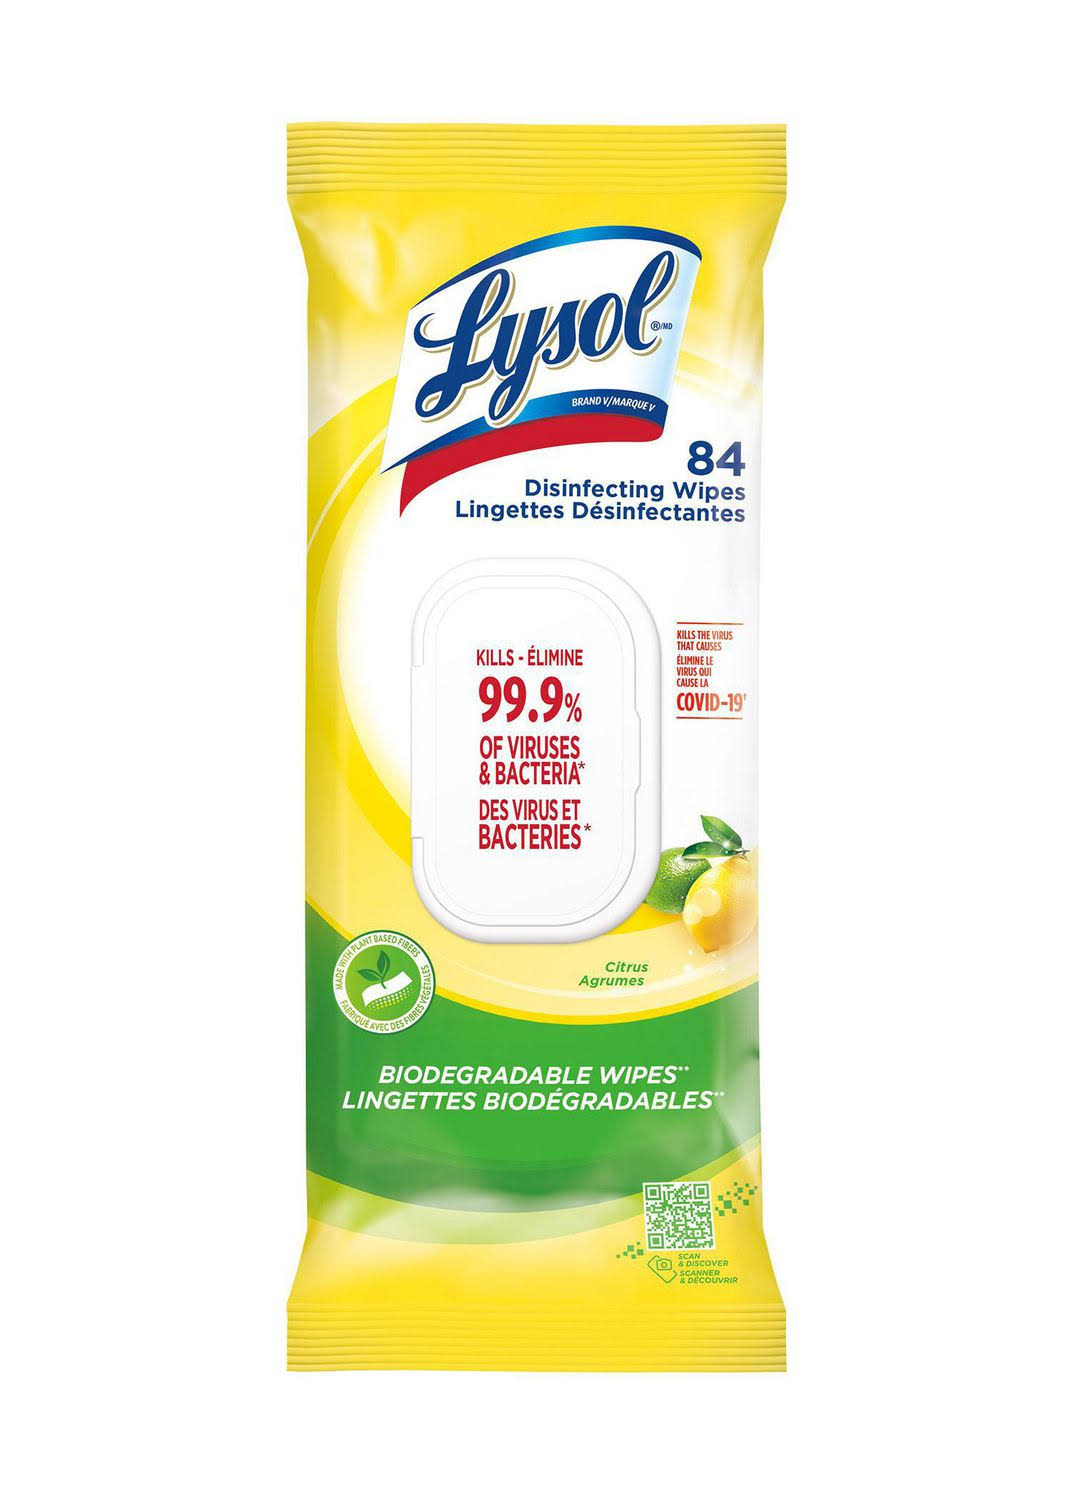 Lysol Biodegradable Disinfecting Wipes Citrus (84 units)